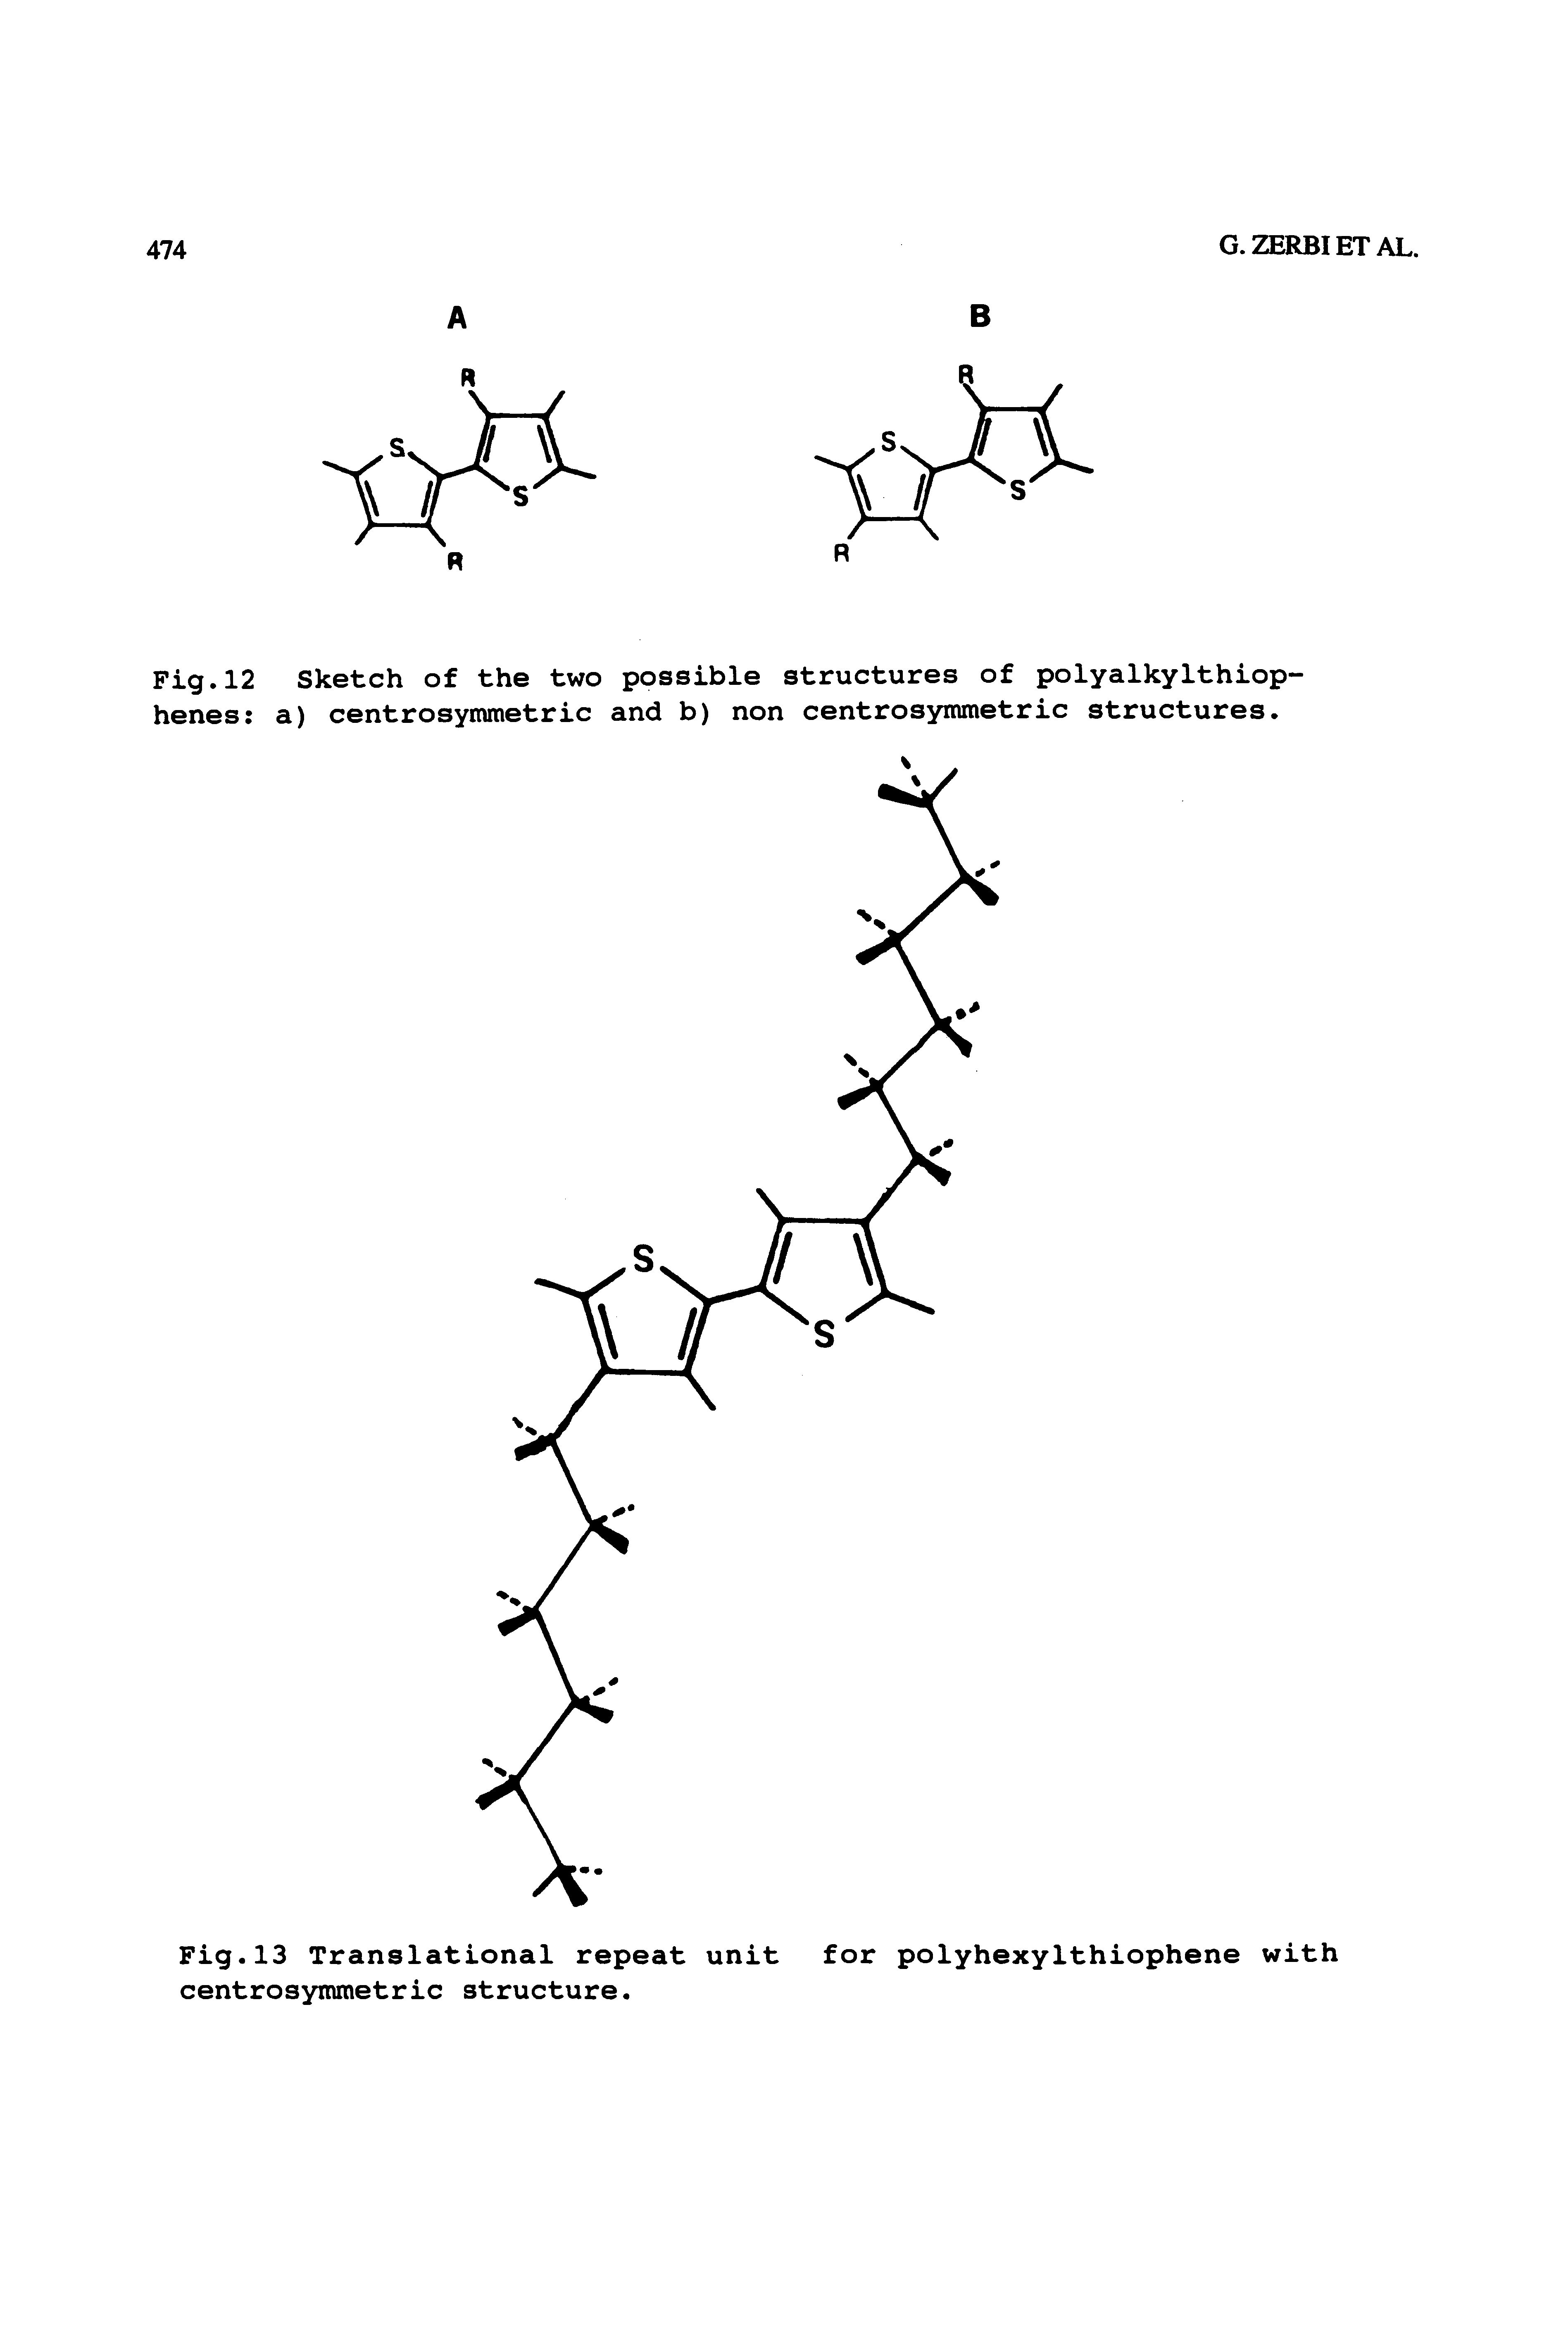 Fig.13 Translational repeat unit for polyhexylthiophene with centrosymmetric structure.